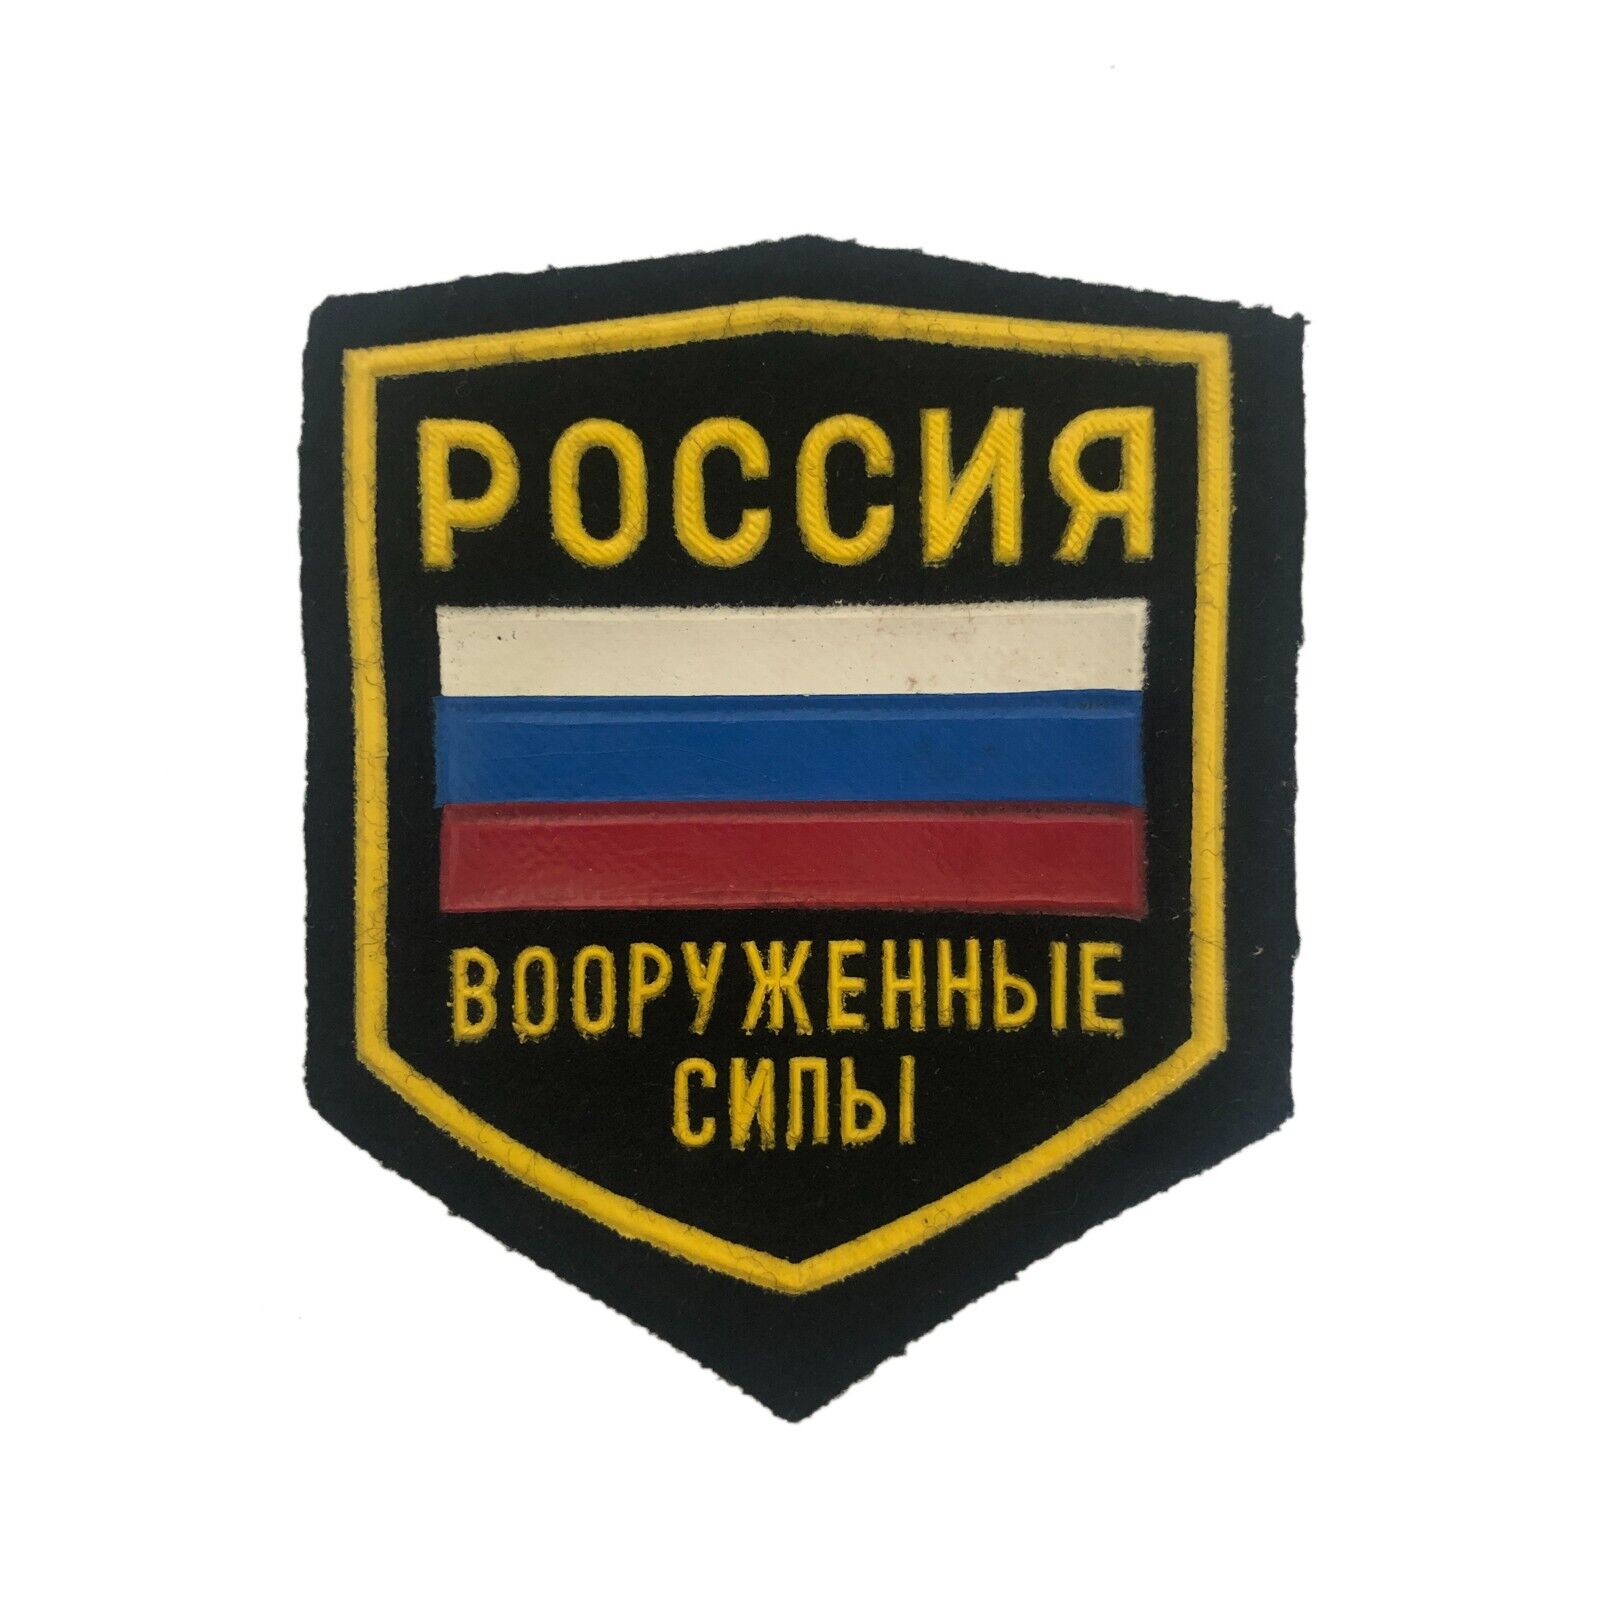 Original 1992 Russian Armed Forces Army Military Sew On Sleeve Patch